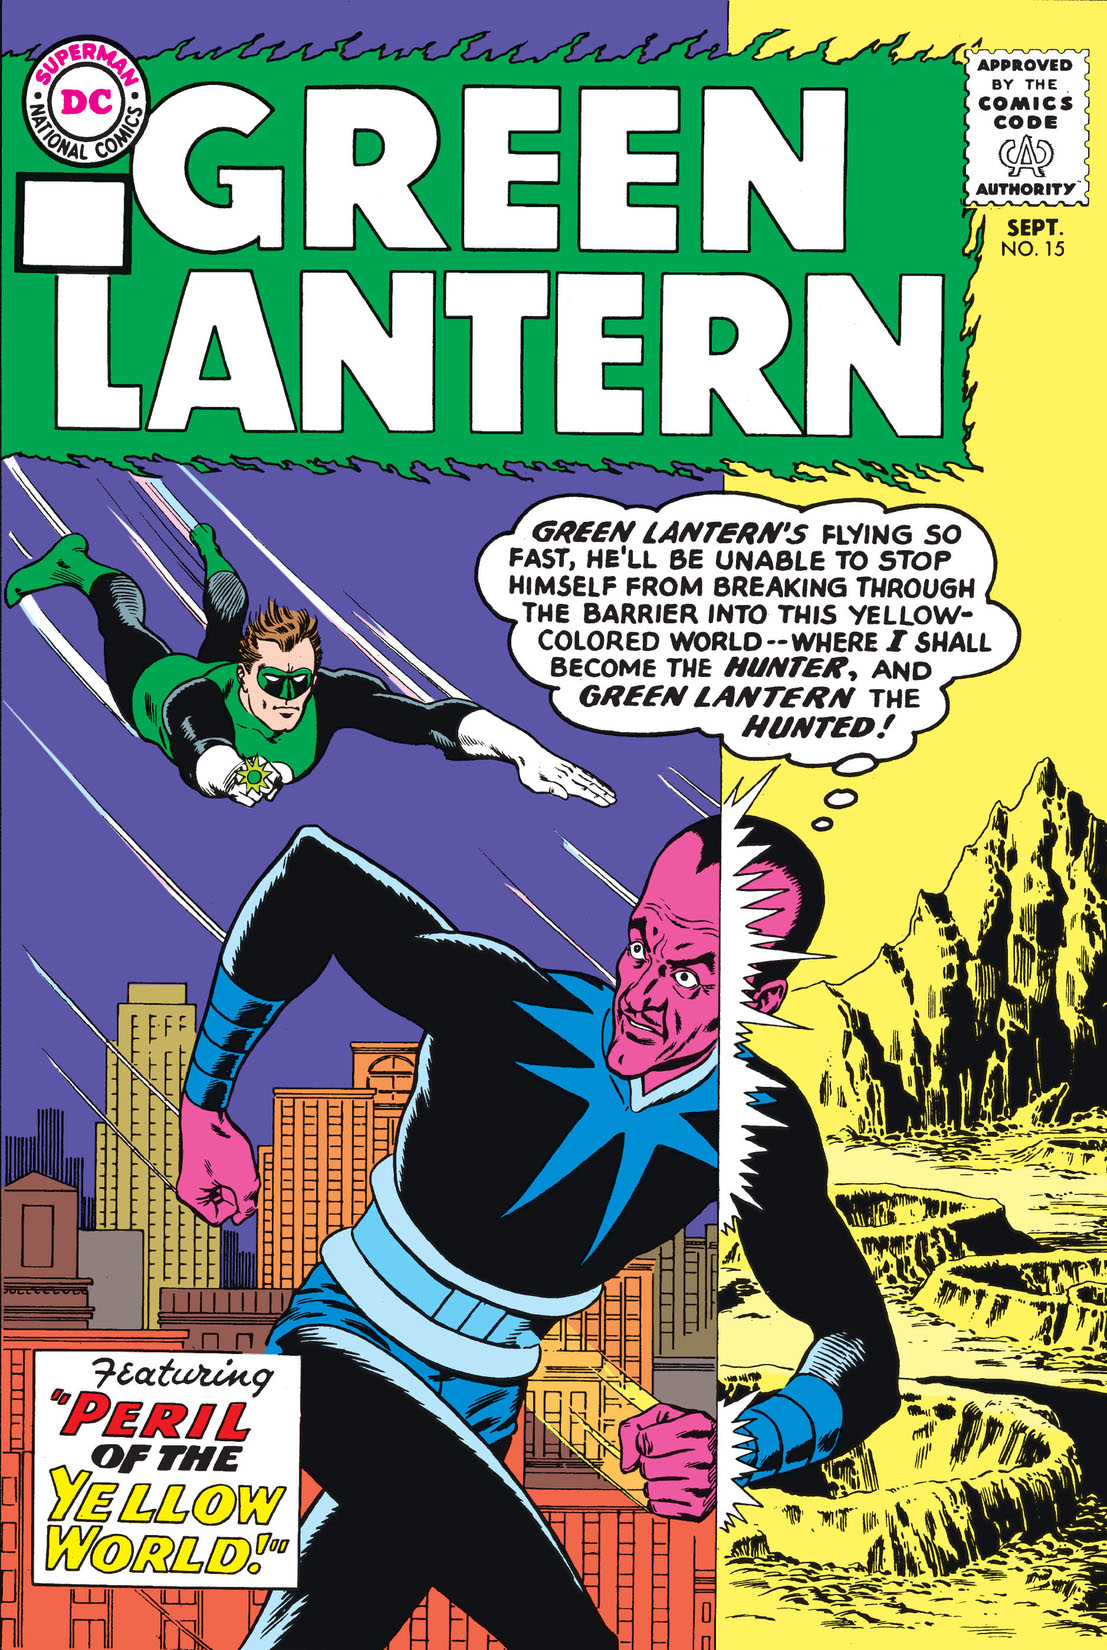 Green Lantern (1960-) #15 preview images